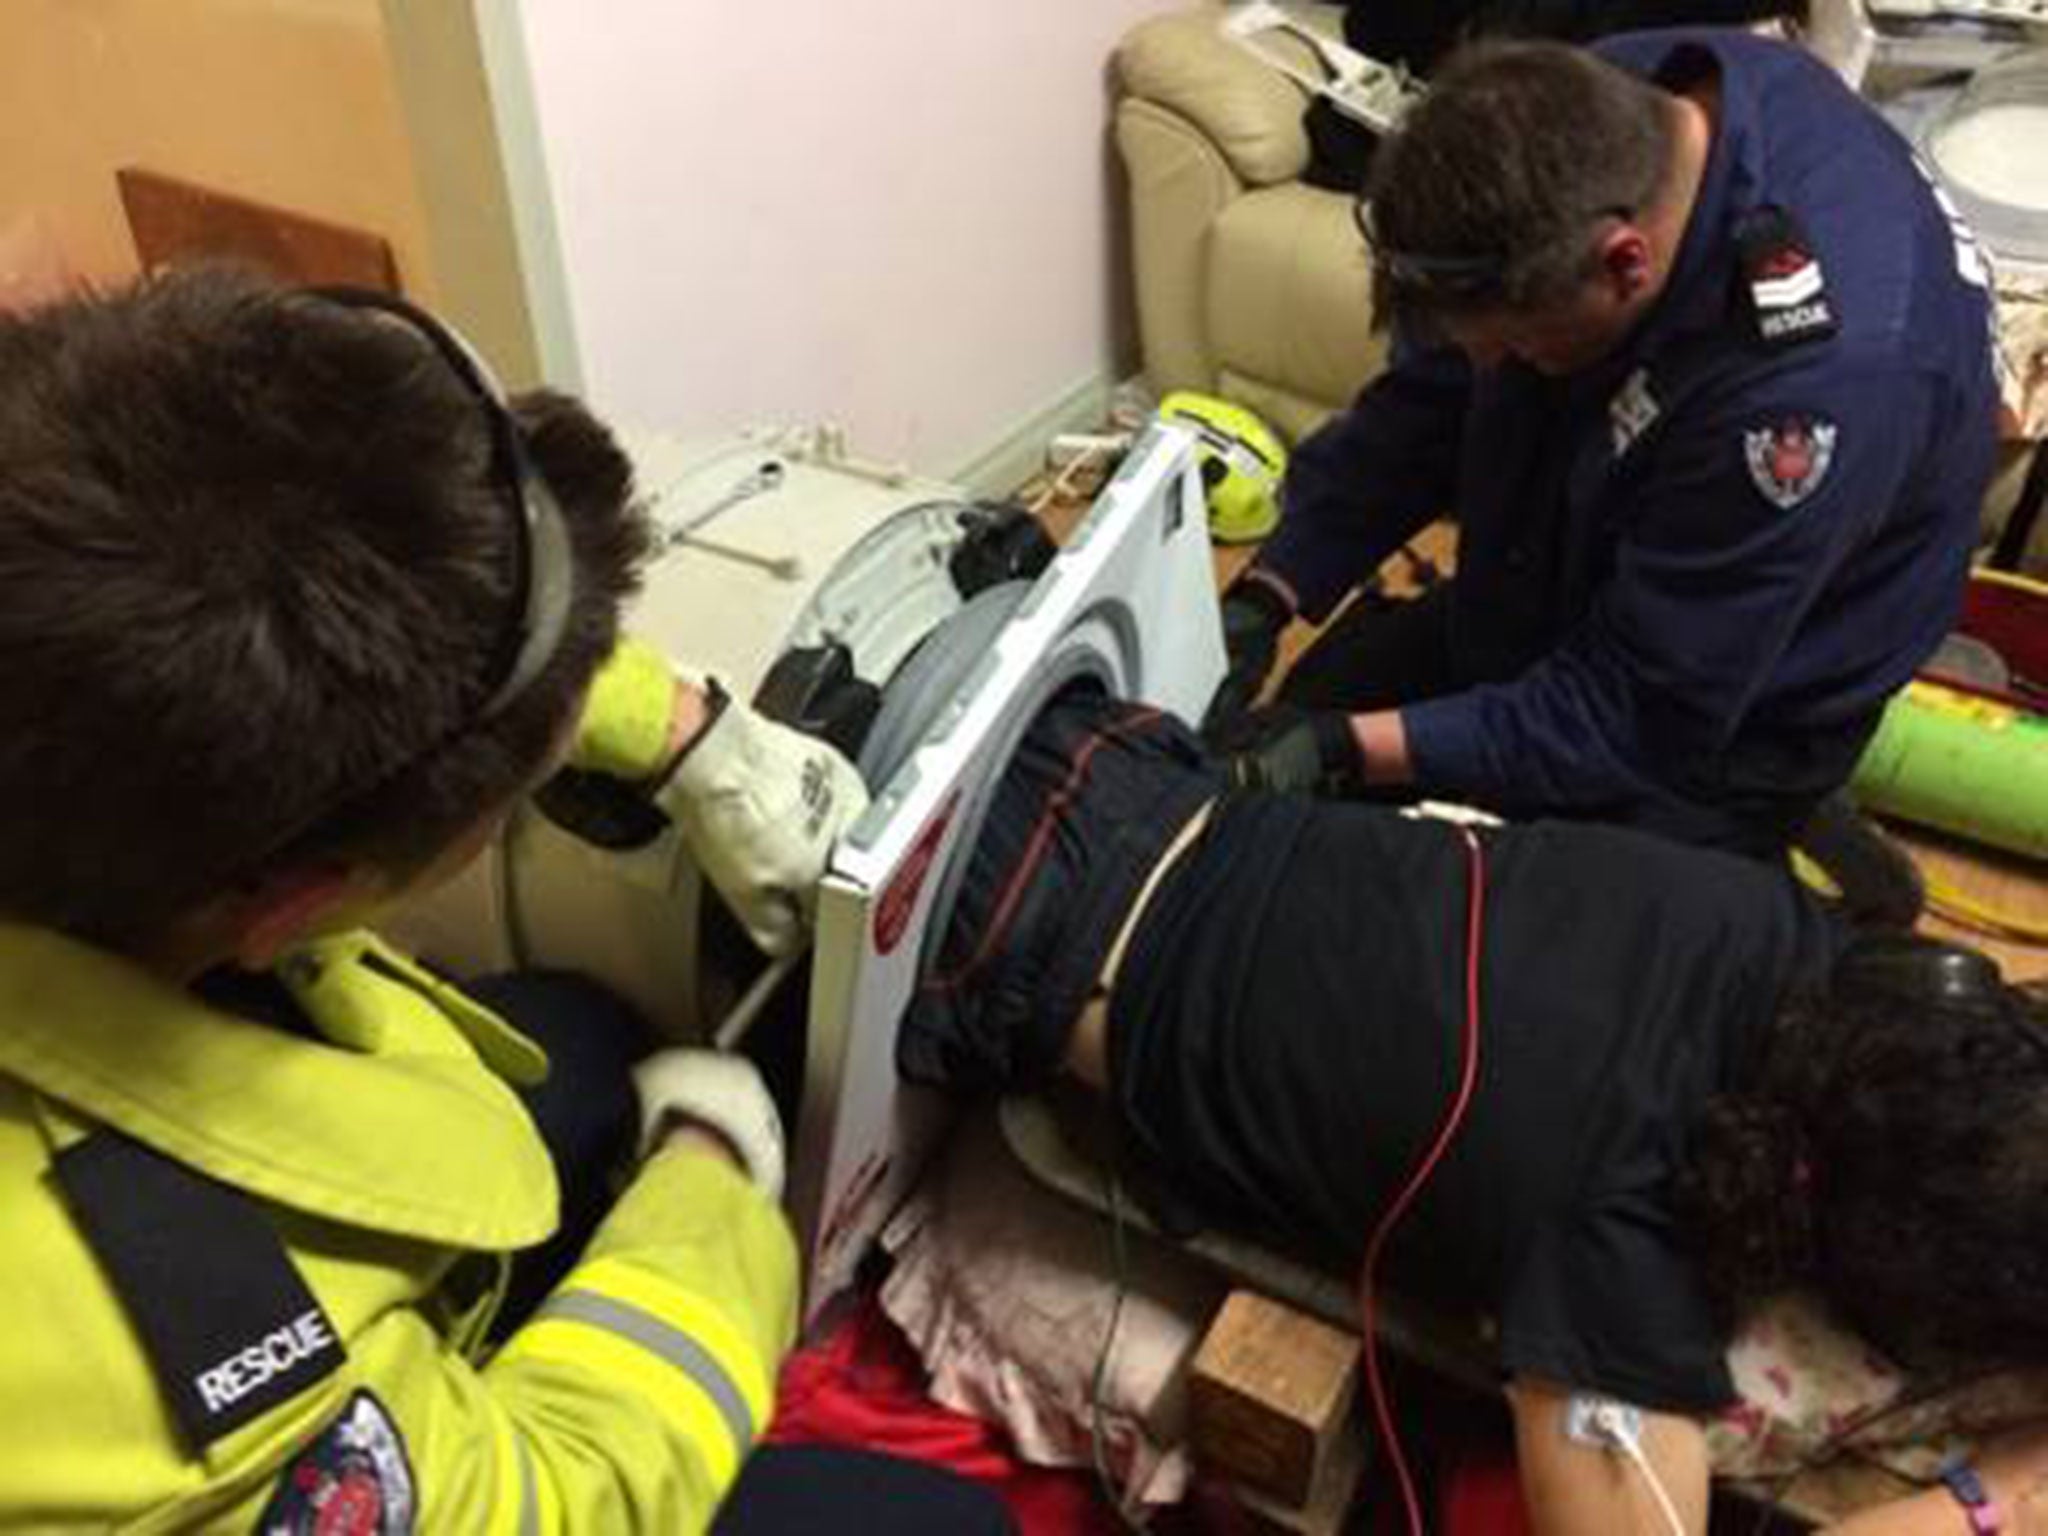 Firefighters work to free a man who got stuck in a washing machine